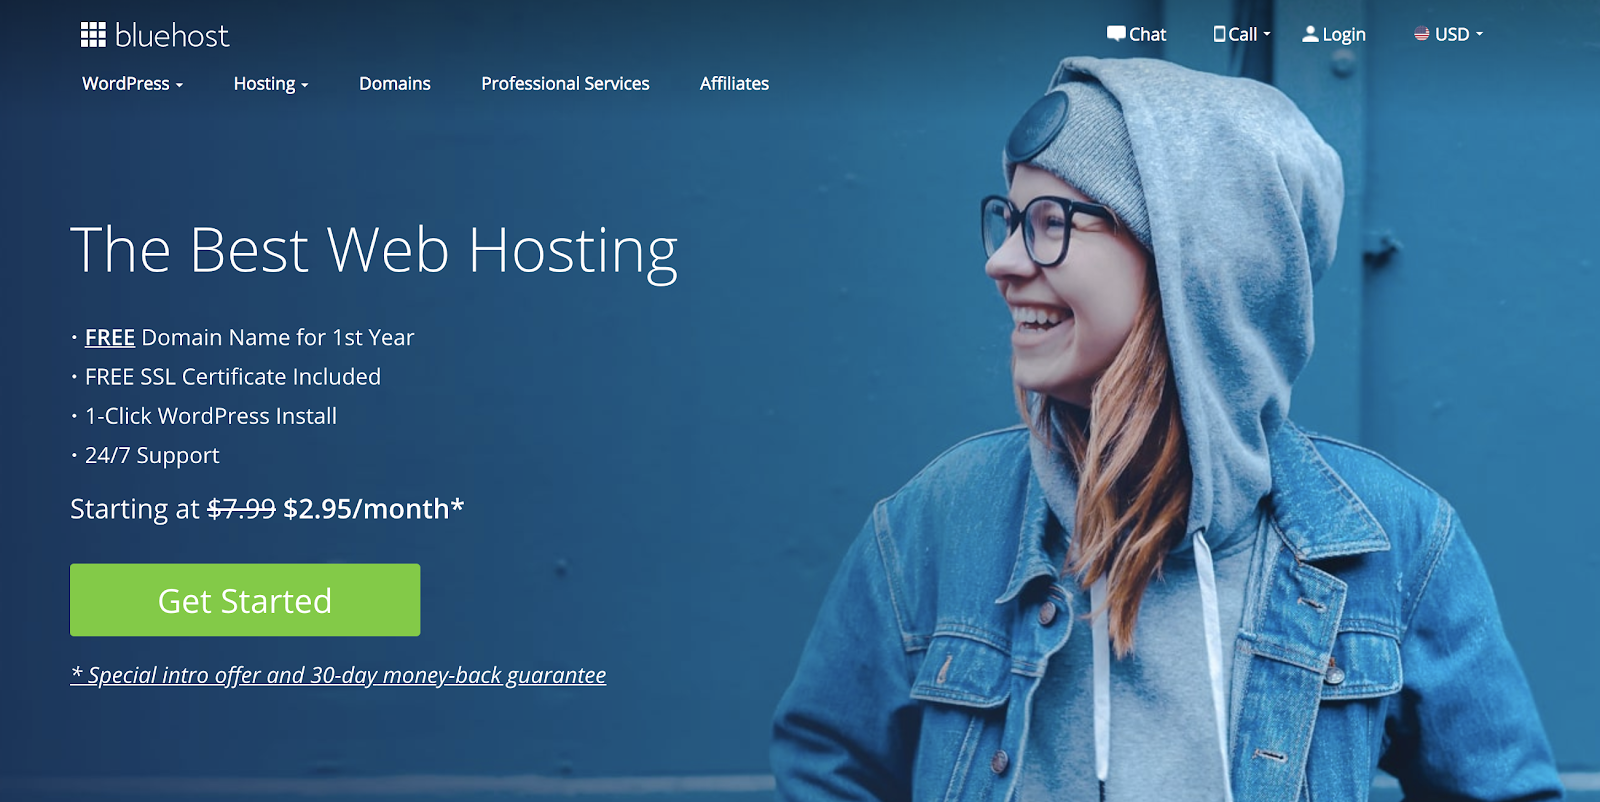 Bluehost Hosting is a Good Choice For New Bloggers (Screenshot)